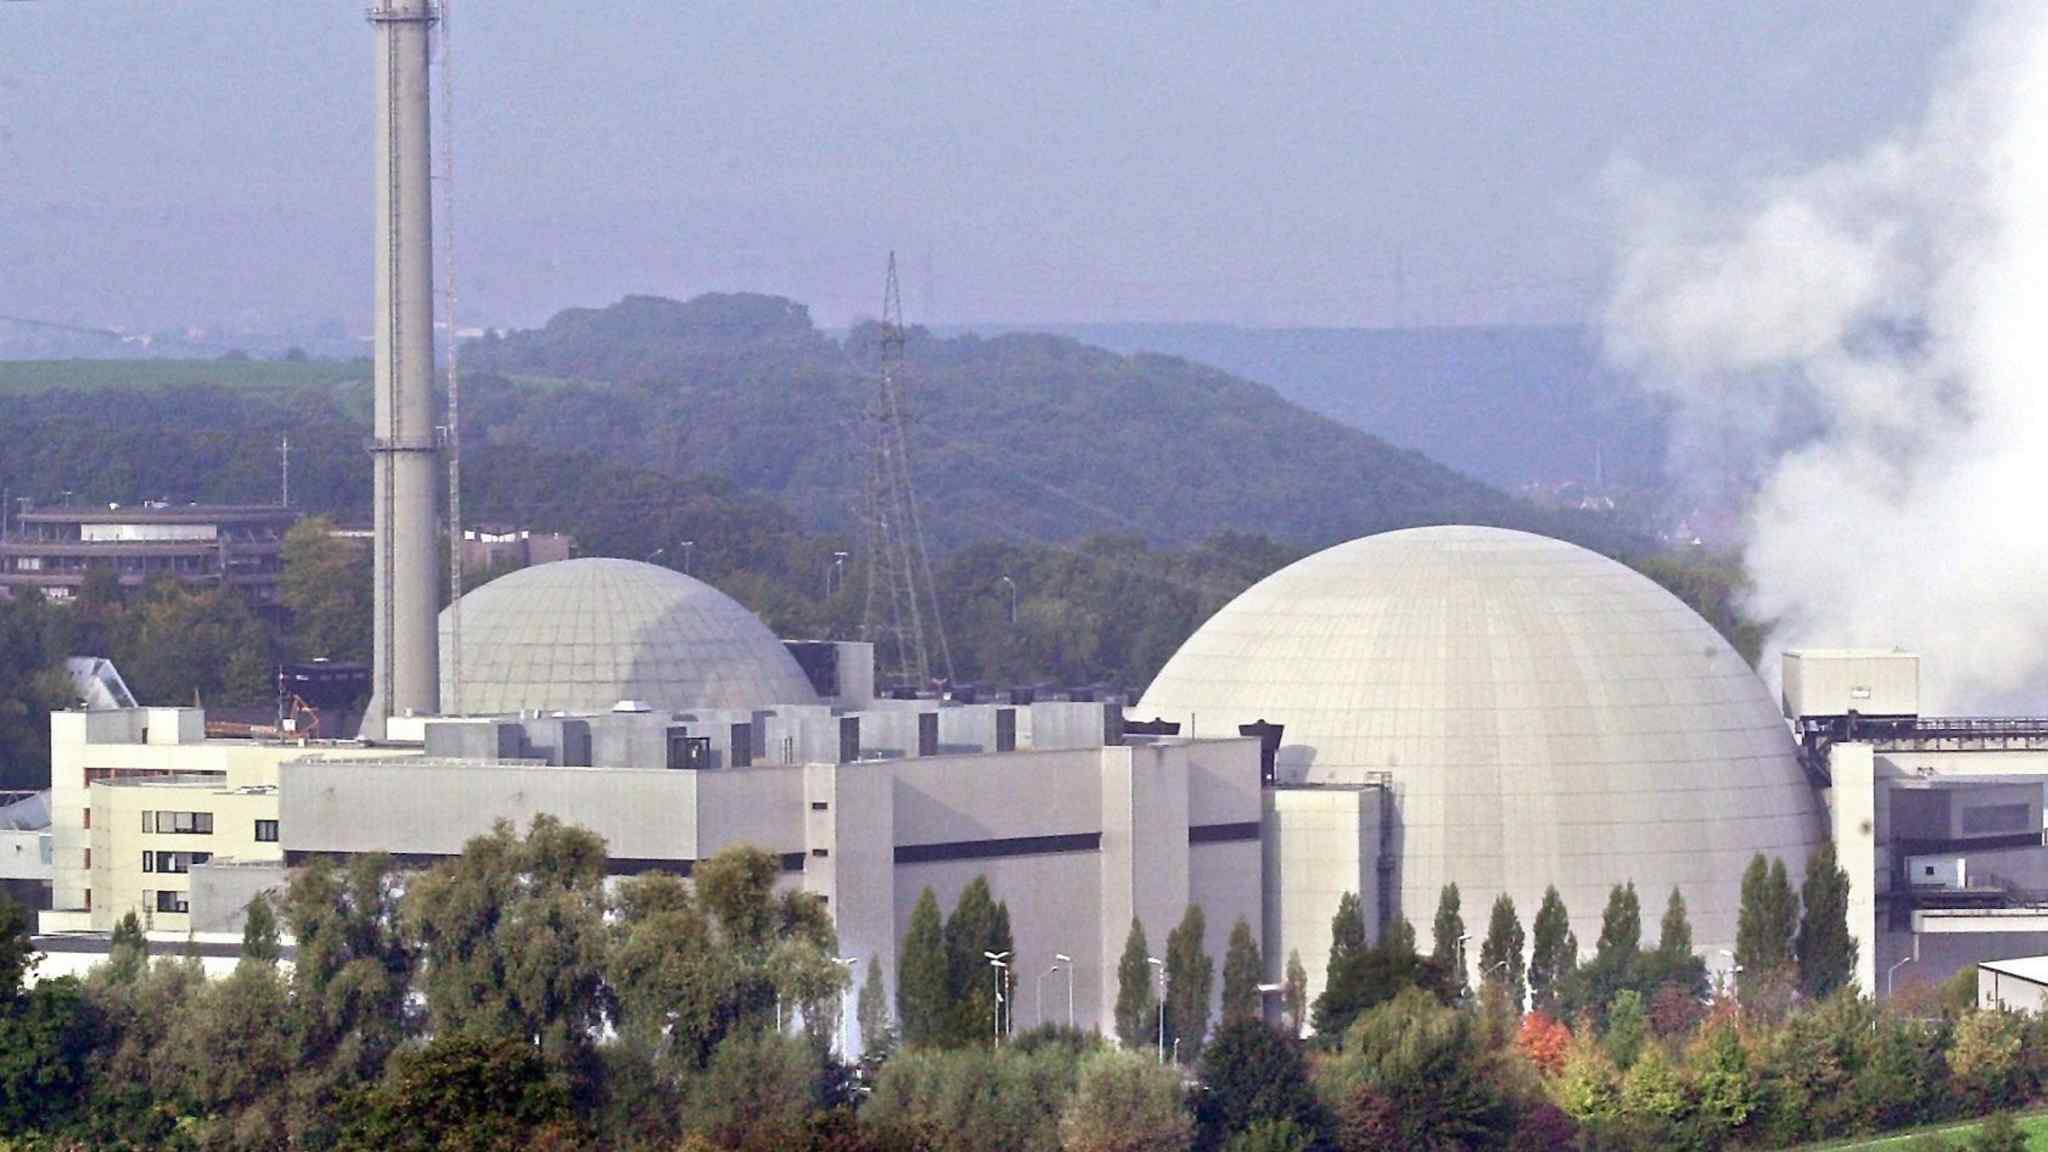 Live news updates: Two of Germany’s nuclear plants to keep operating beyond shutdown dates